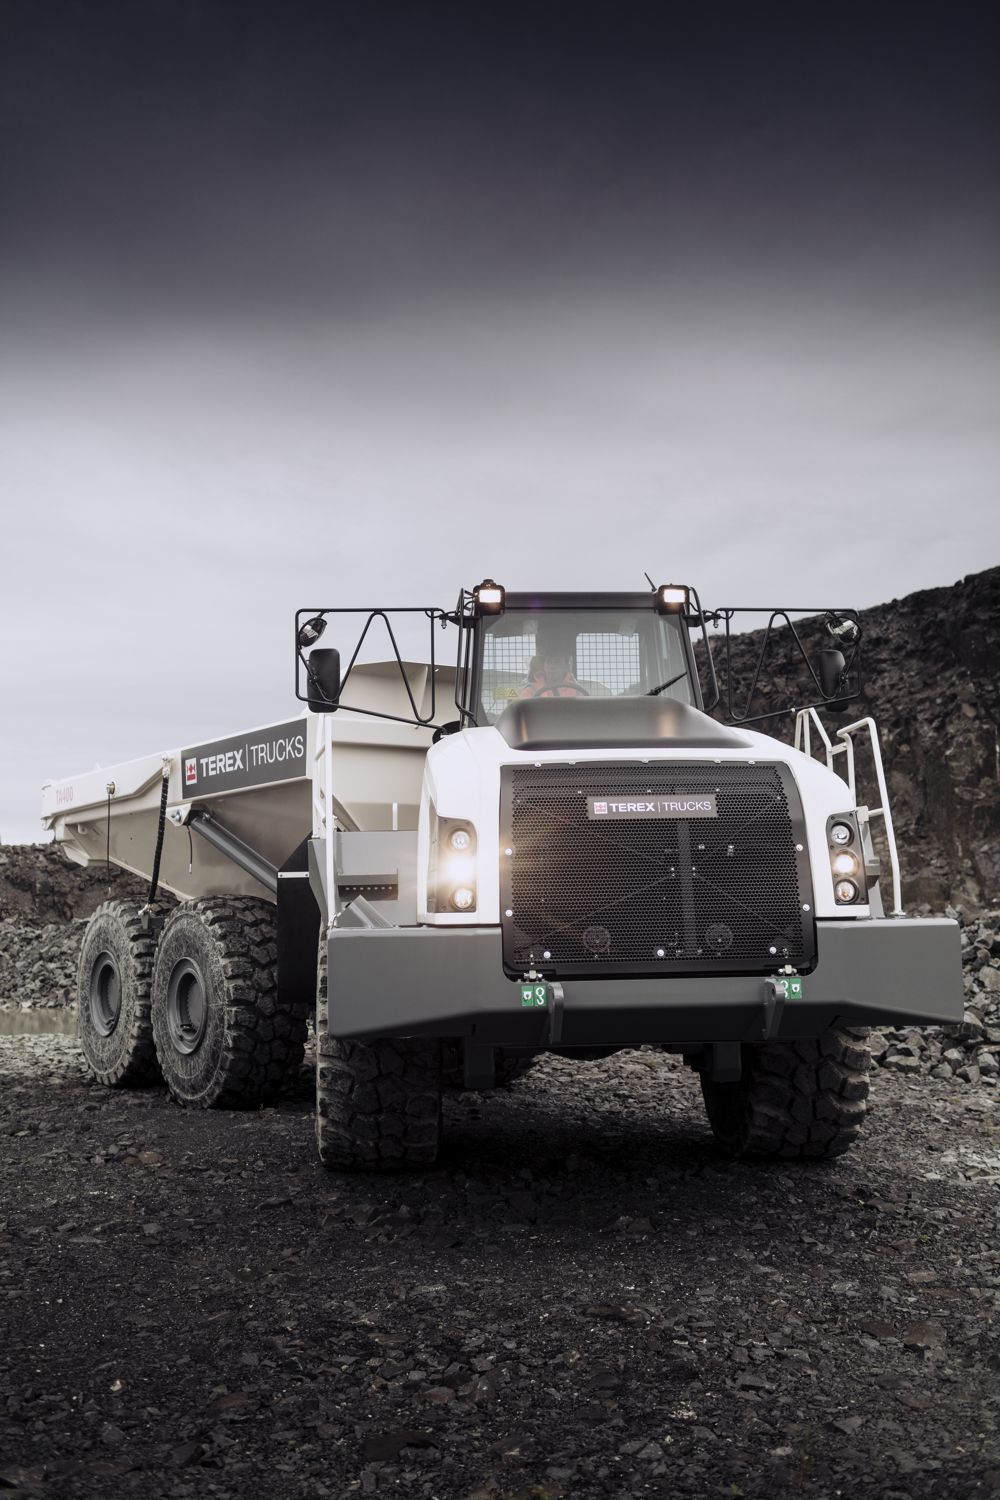 The TA400 is the biggest articulated hauler manufactured by Terex Trucks, it is designed to meet the demands of the most extreme operations.